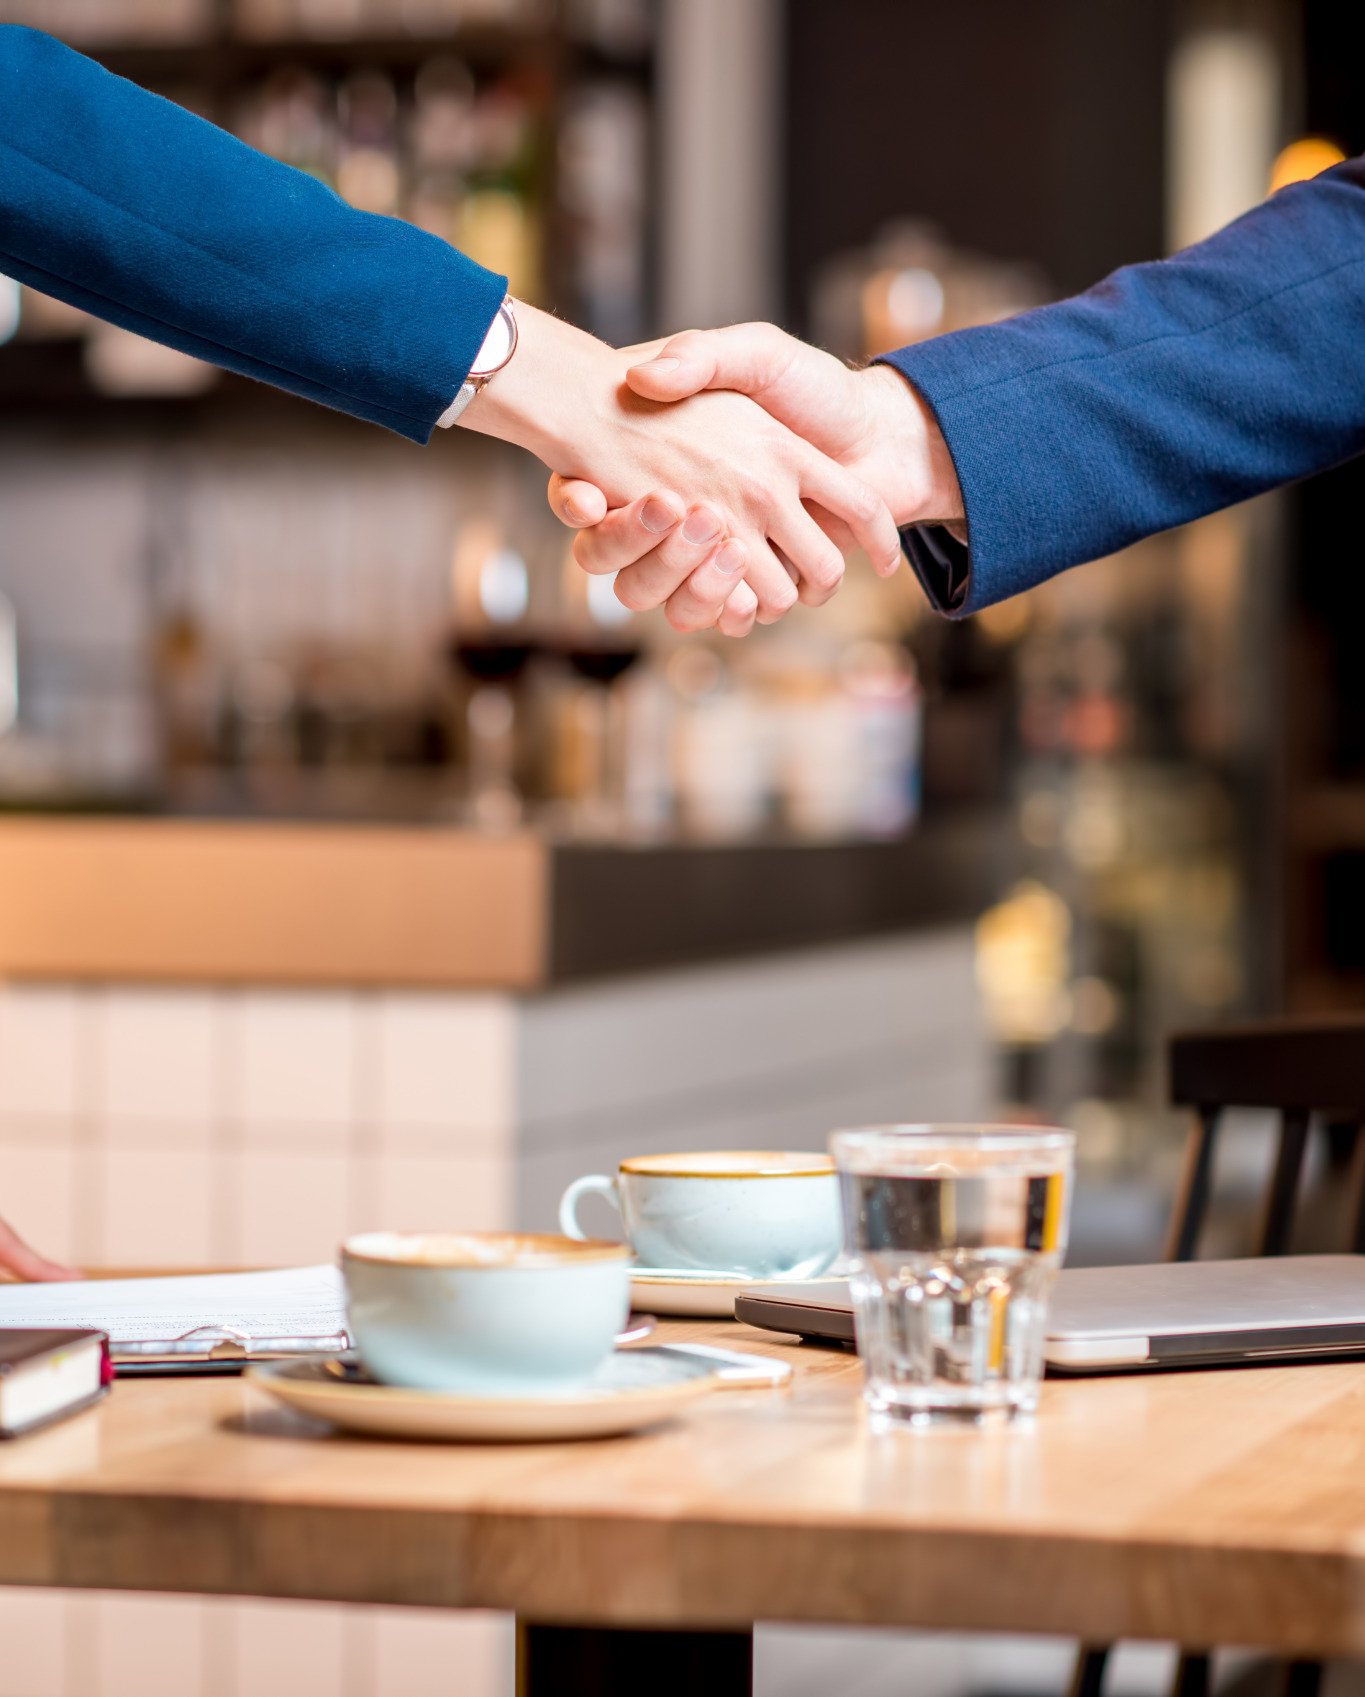 Two people shaking hands over a casual coffee